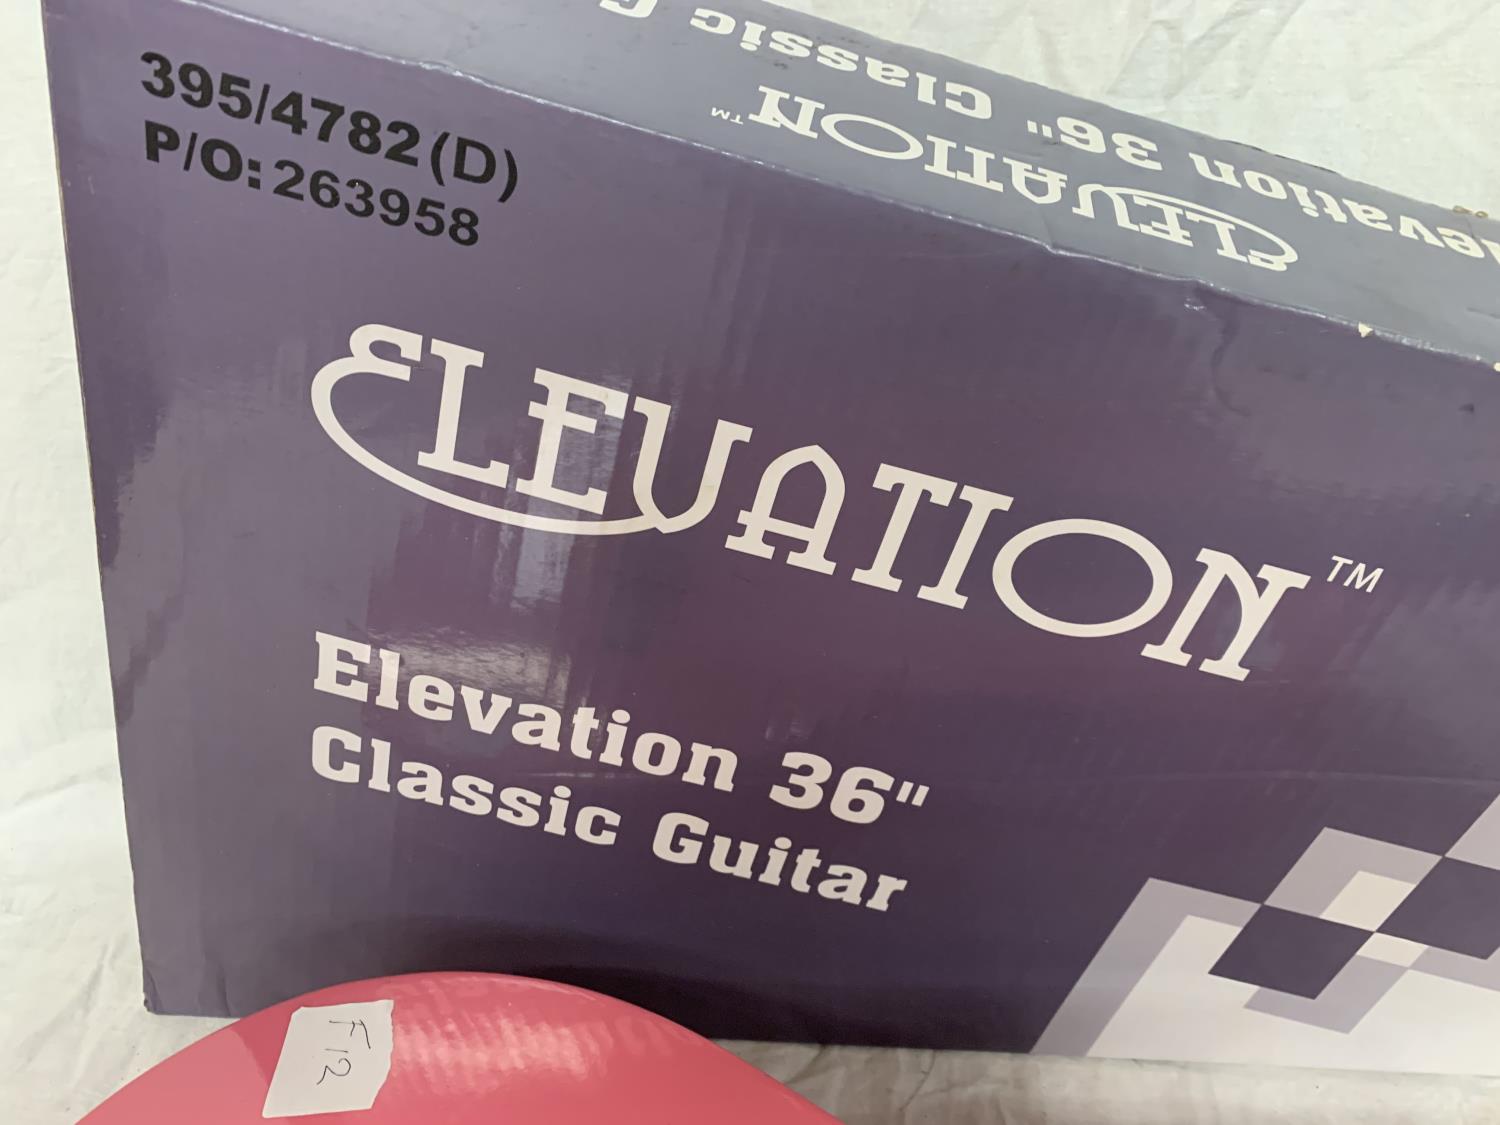 A NEW AND BOXED PINK ELEVATION 36 INCH CLASSIC GUITAR - Image 4 of 4